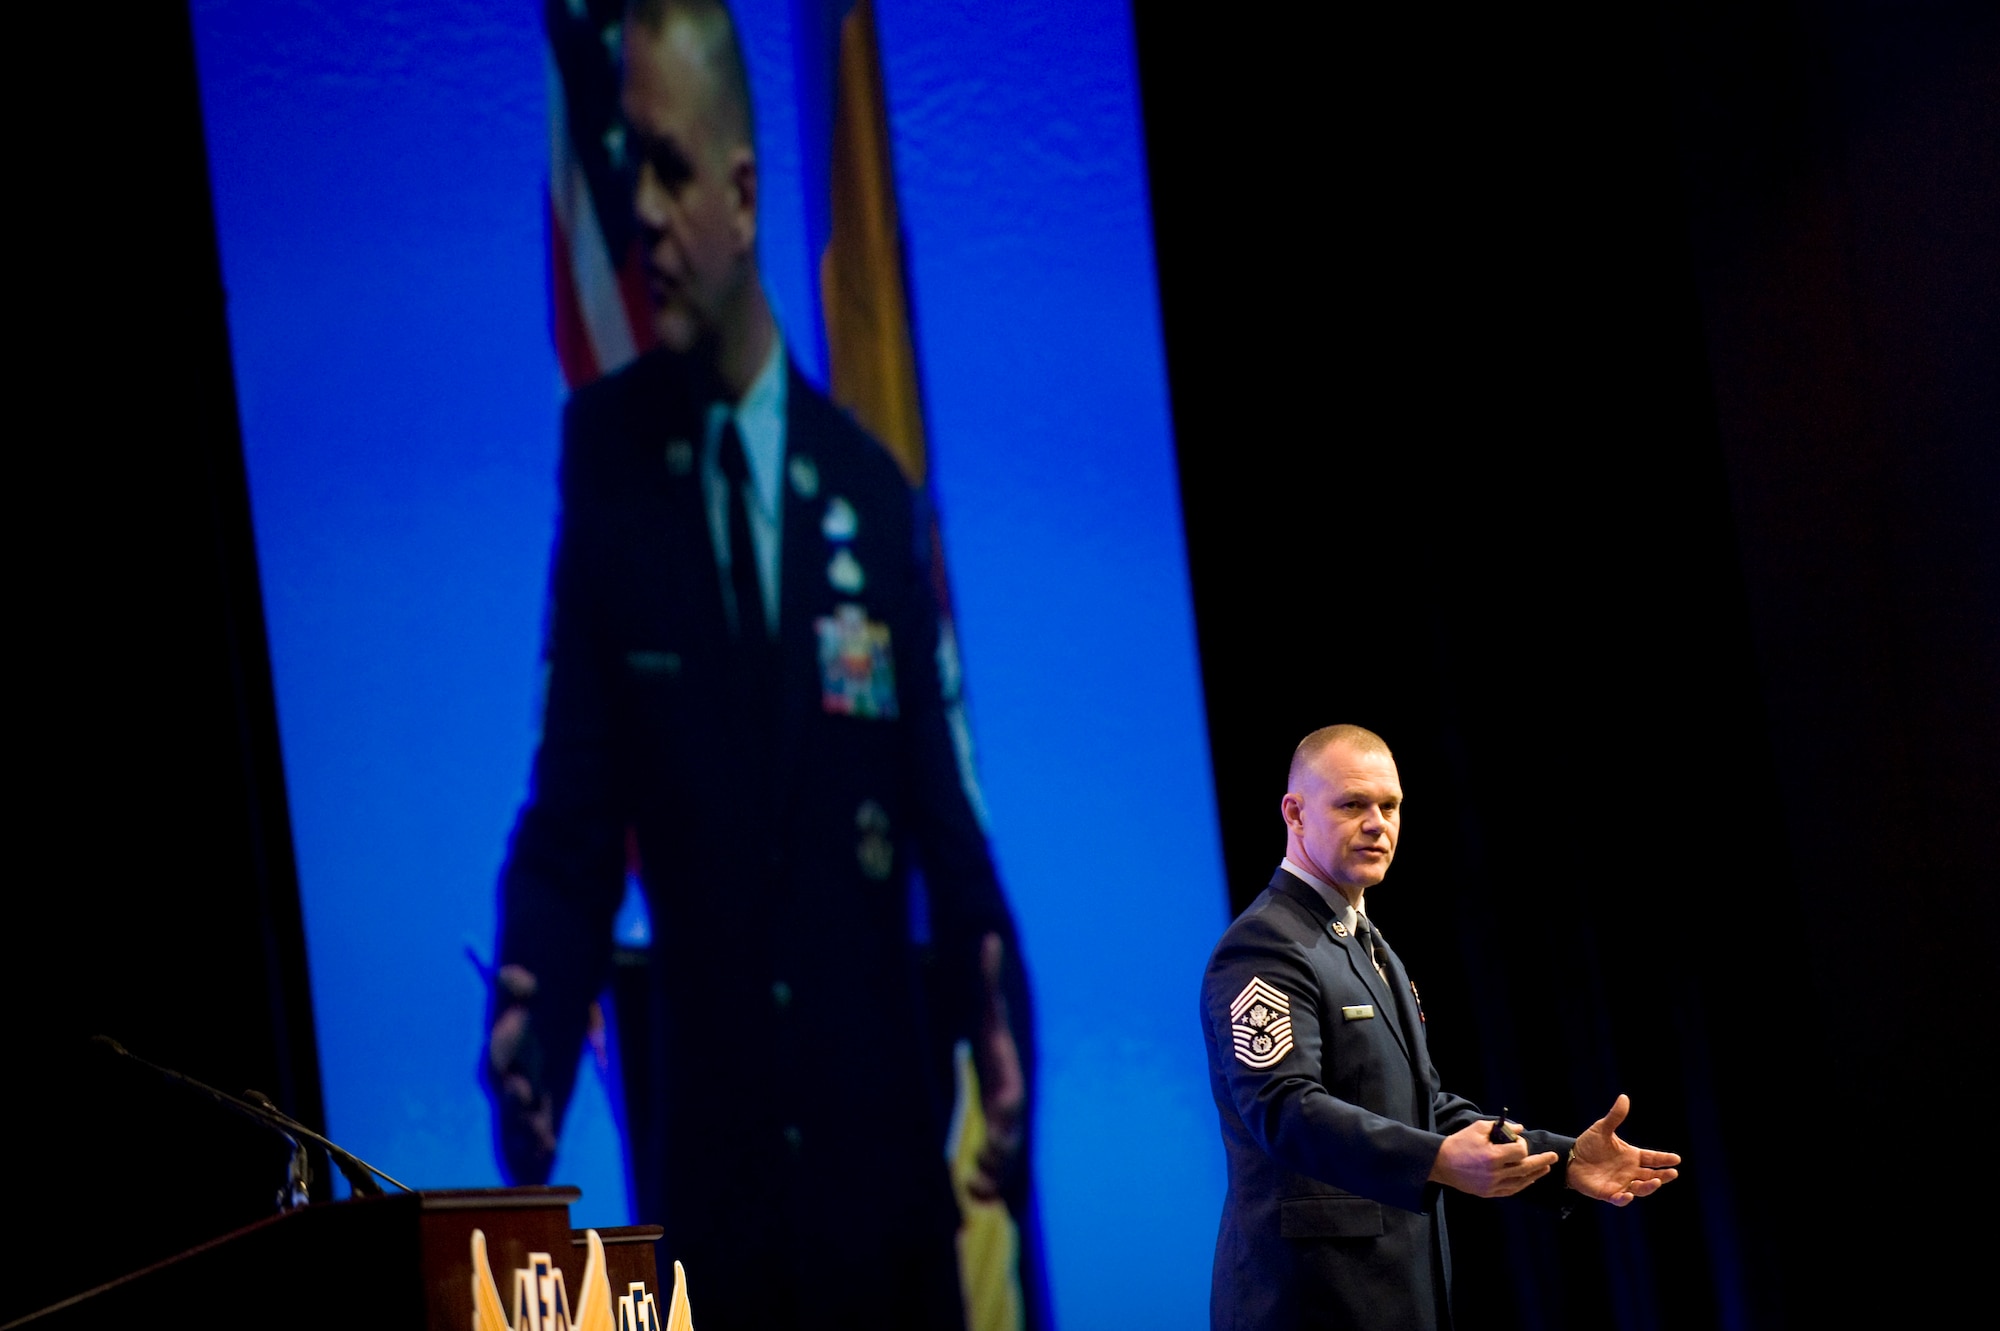 Chief Master Sgt. of the Air Force James A. Roy speaks about the enlisted perspective during the Air Force Association's Air Warfare Symposium and Technology Exposition Feb. 18, 2010, at the Rosen Shingle Creek Hotel in Orlando, Fla. The symposium will run through Feb. 19.  (U.S. Air Force photo/Staff Sgt. Desiree N. Palacios)
